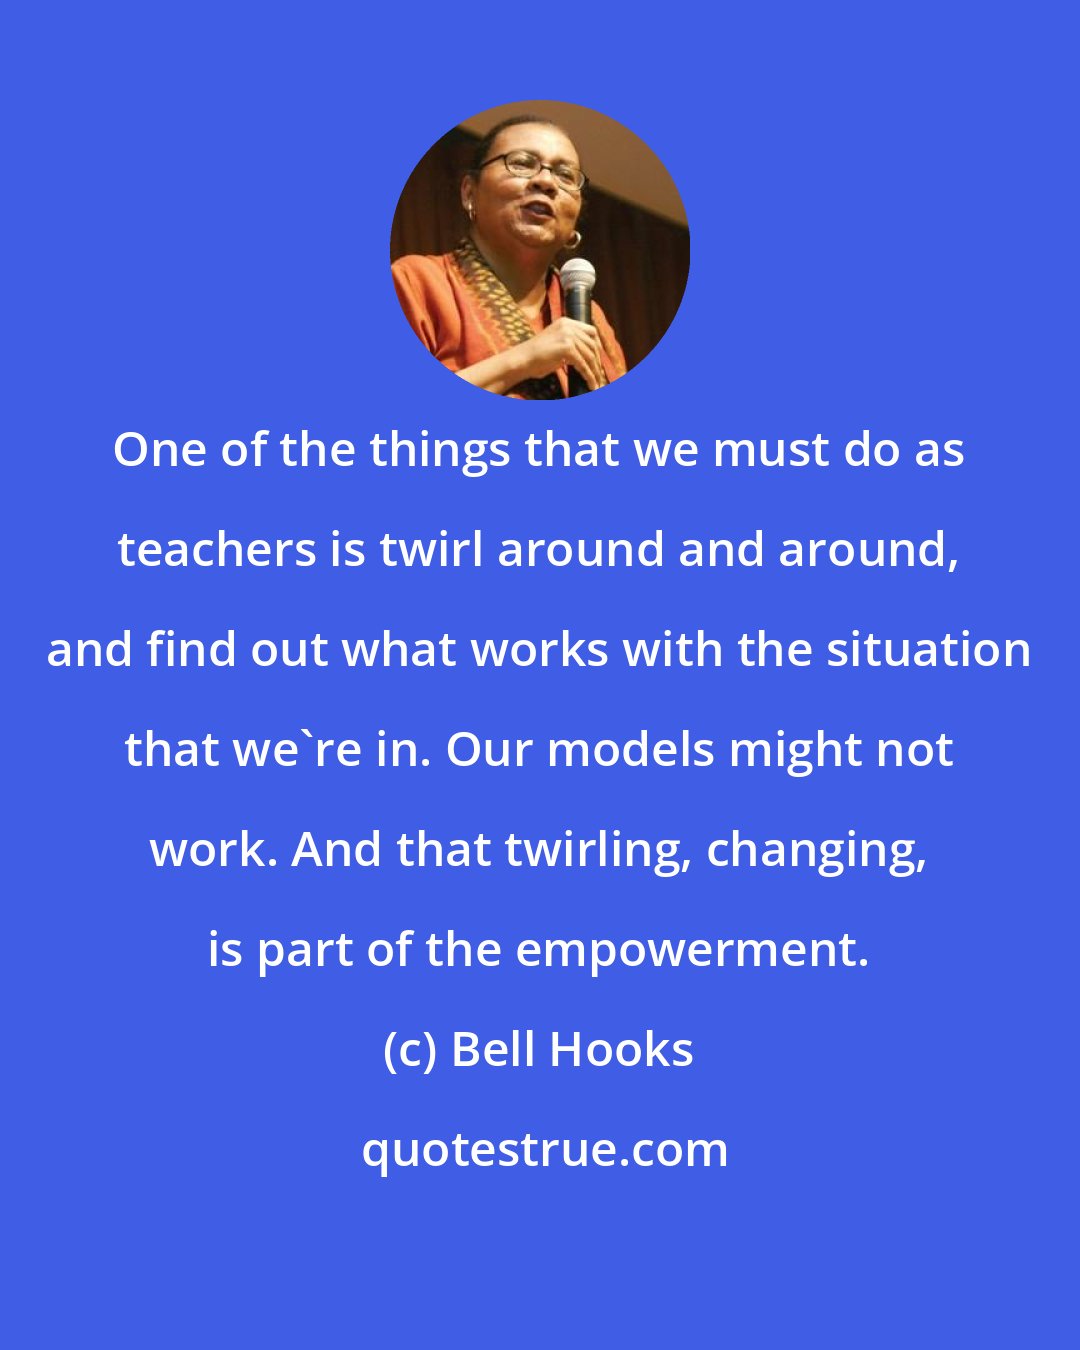 Bell Hooks: One of the things that we must do as teachers is twirl around and around, and find out what works with the situation that we're in. Our models might not work. And that twirling, changing, is part of the empowerment.